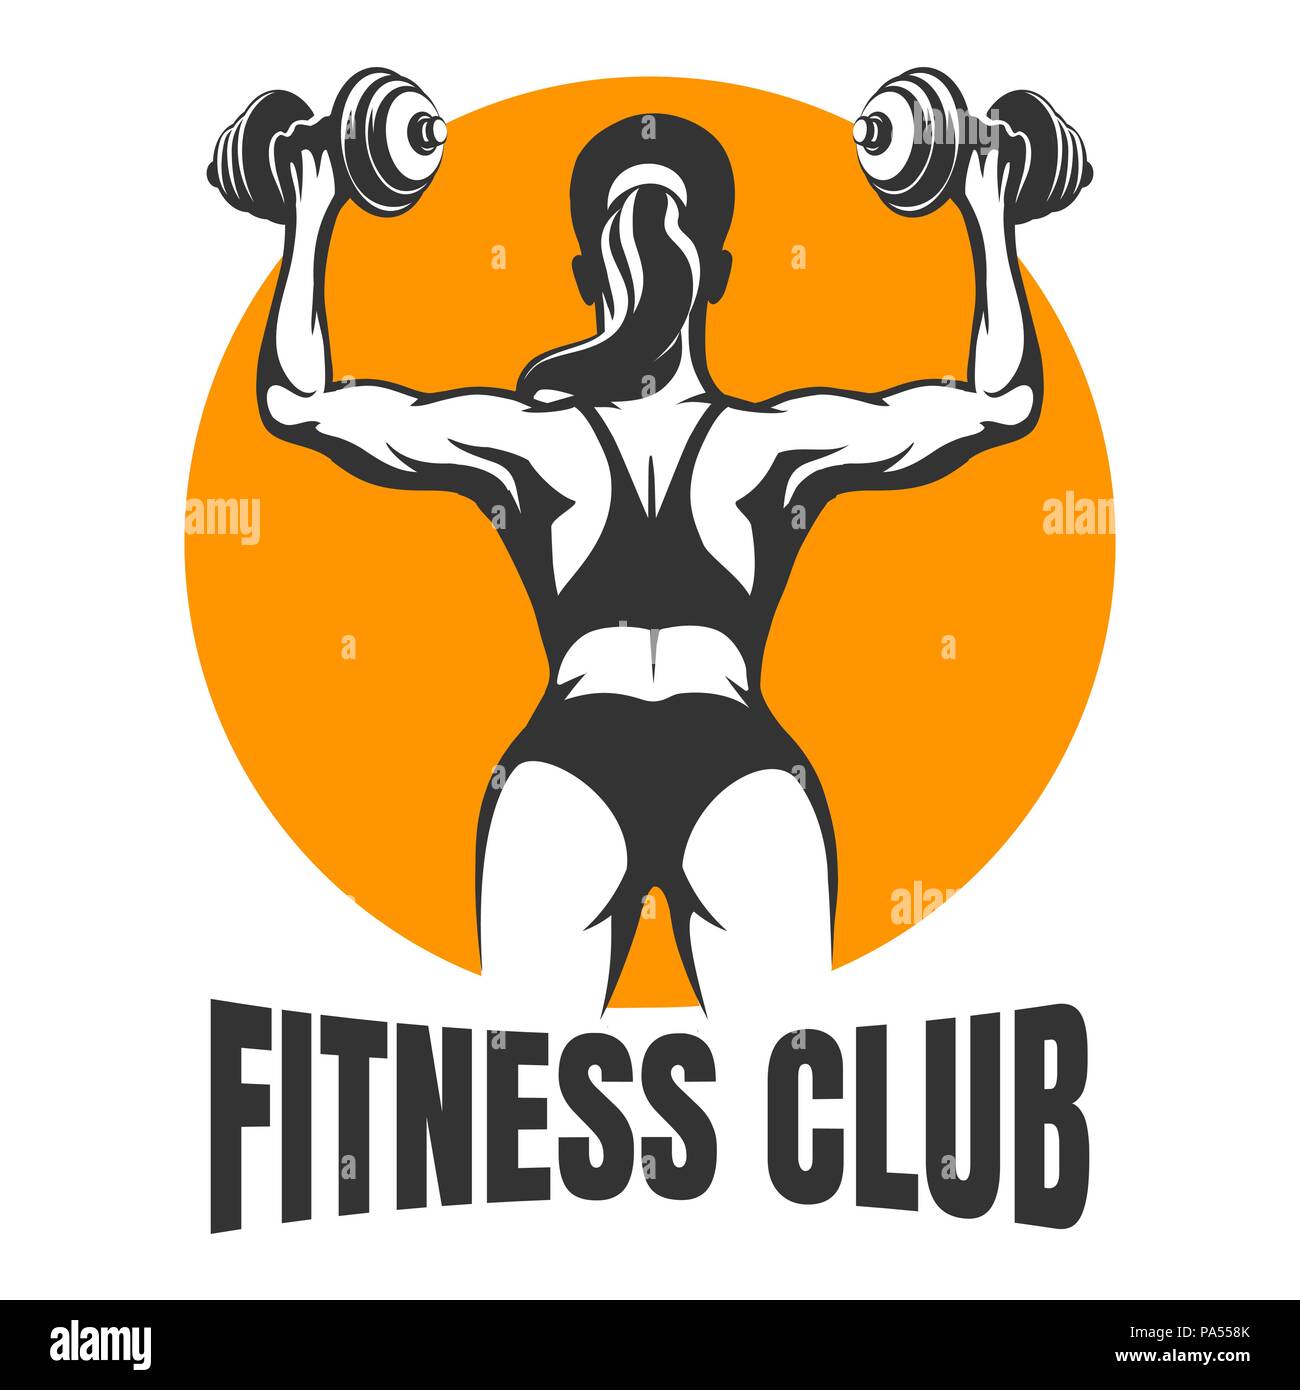 https://c8.alamy.com/comp/PA558K/fitness-club-emblem-with-training-woman-woman-holds-dumbbells-on-white-background-vector-illustration-PA558K.jpg